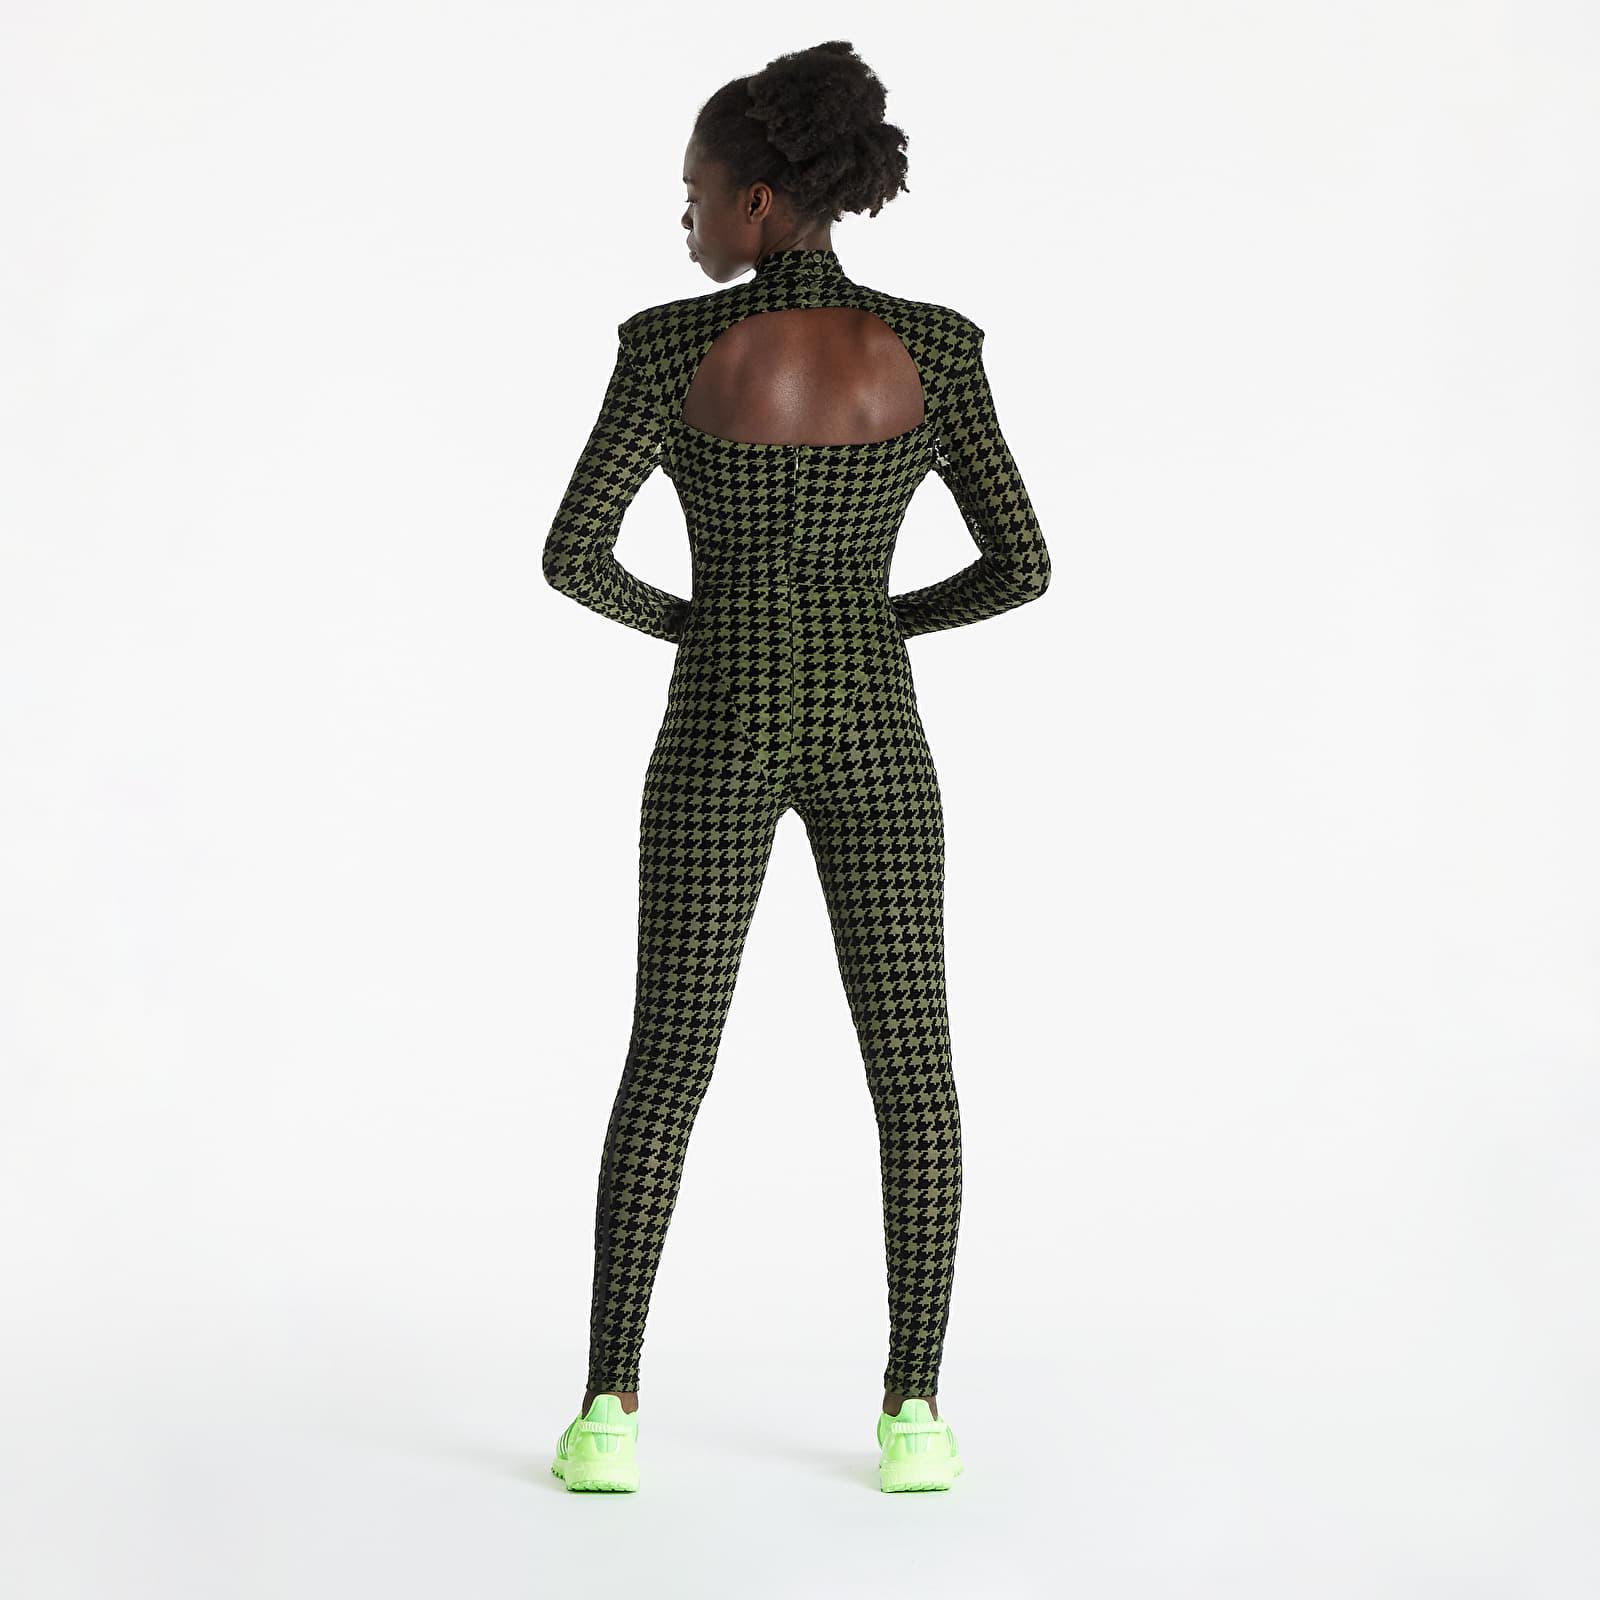 Yara Shahidi jumpsuit: Bought this last year and it's way too big, cannot  return it. Limited edition Lara Shahid jumpsuit created in a collaboration  with Adidas. Question-where would be the best place